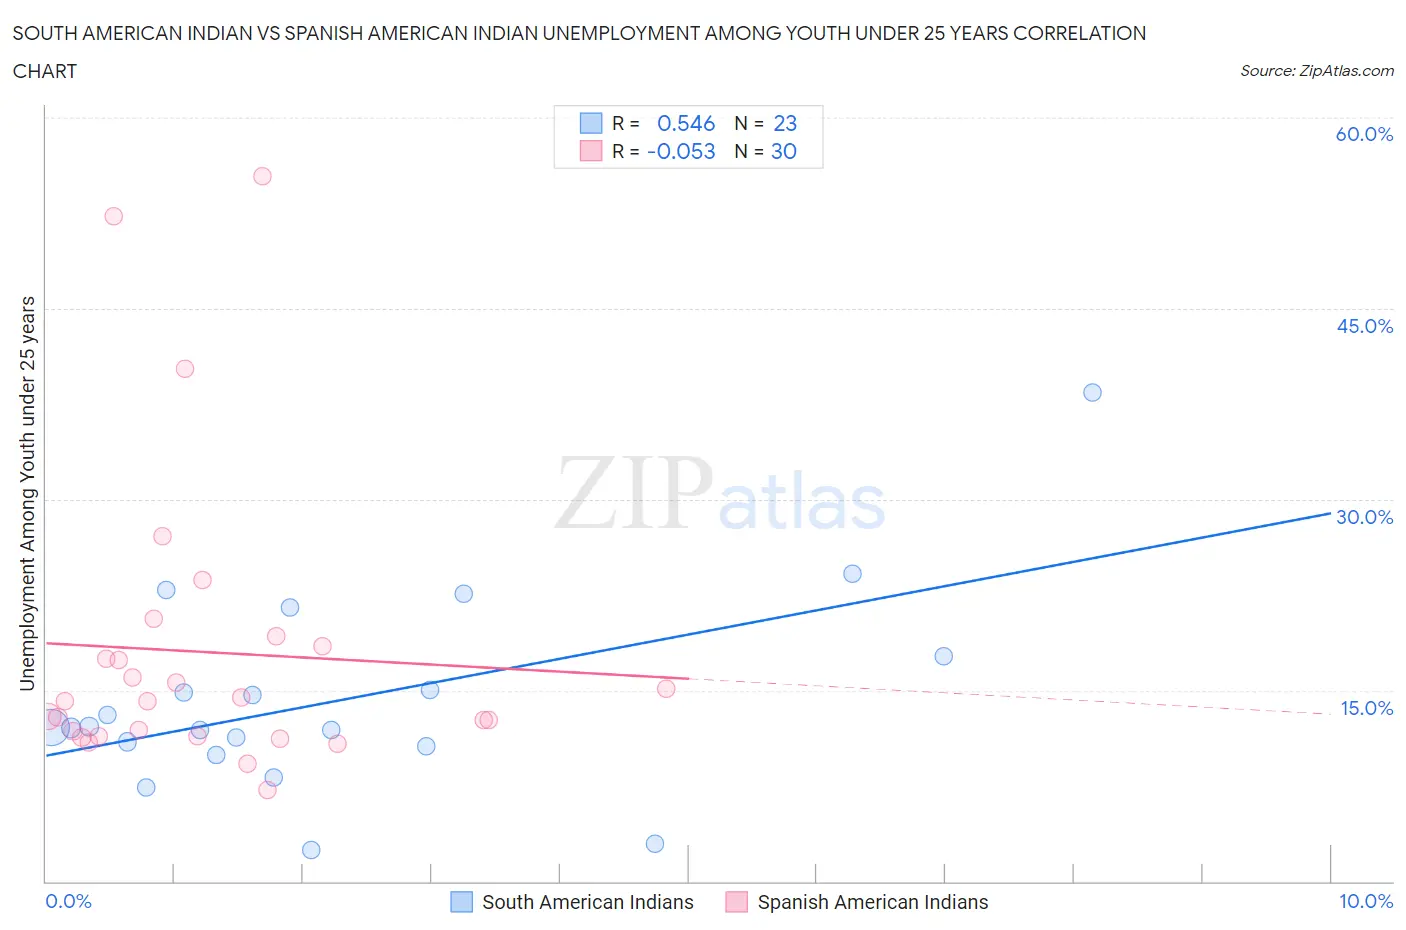 South American Indian vs Spanish American Indian Unemployment Among Youth under 25 years